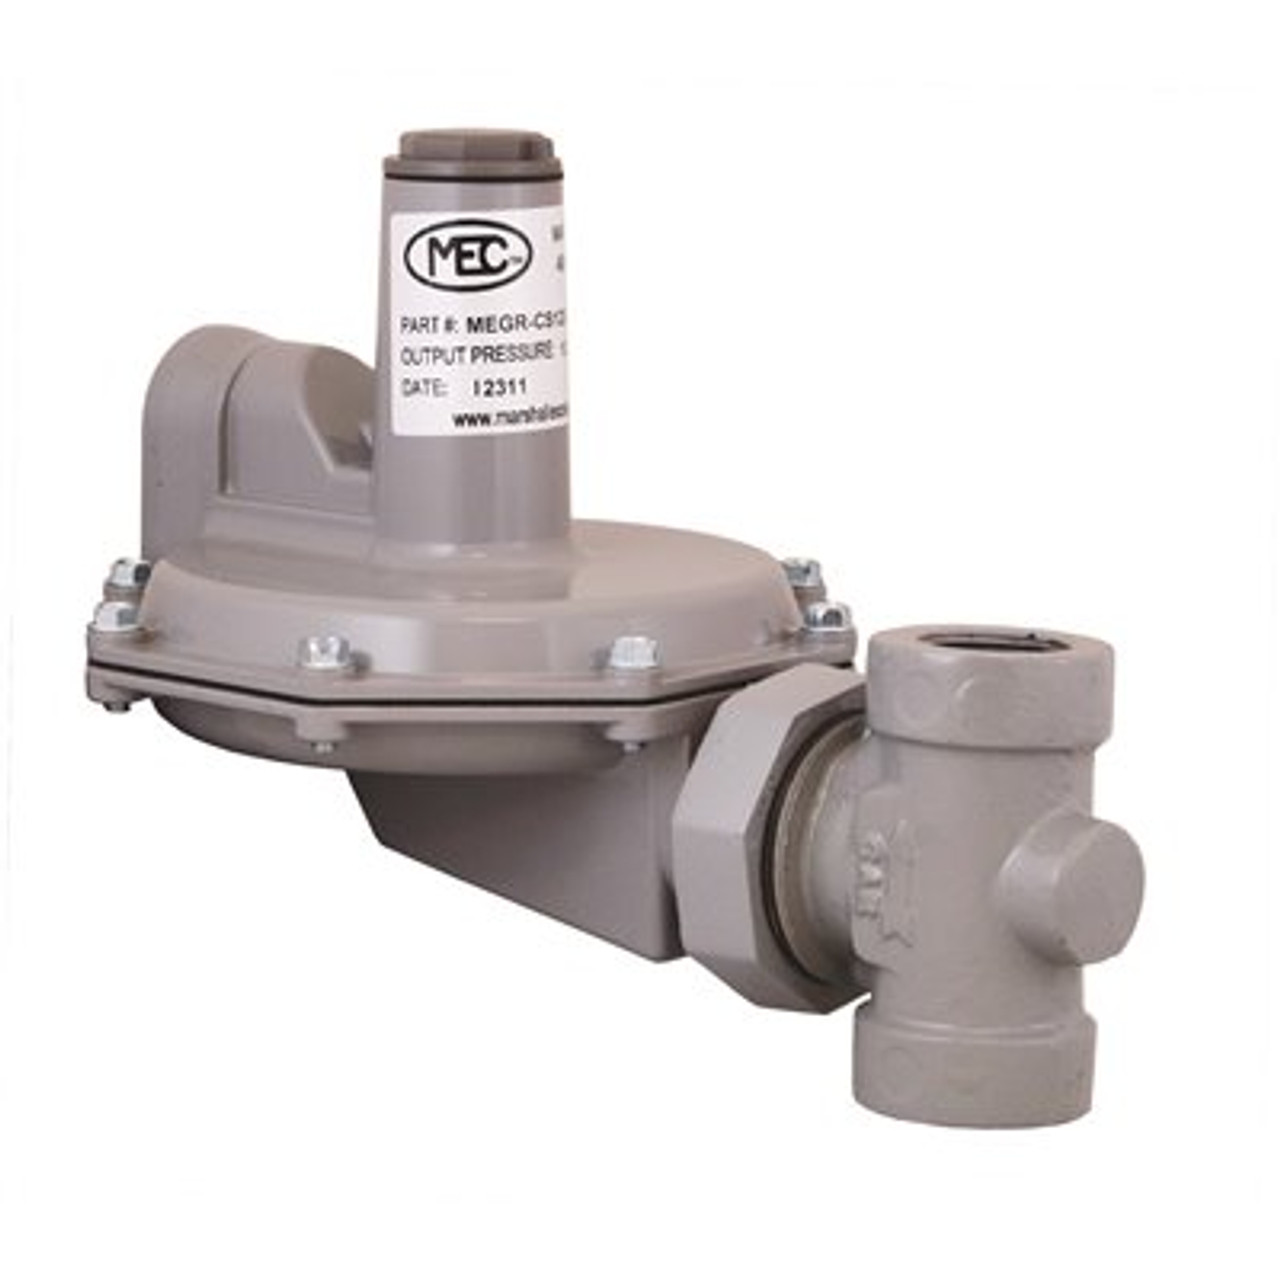 MEC Industrial Low Pressure Regulator with 1/2 in. Orifice, 1-1/4 in. FNPT Inlet and Outlet, 10-14 in. WC